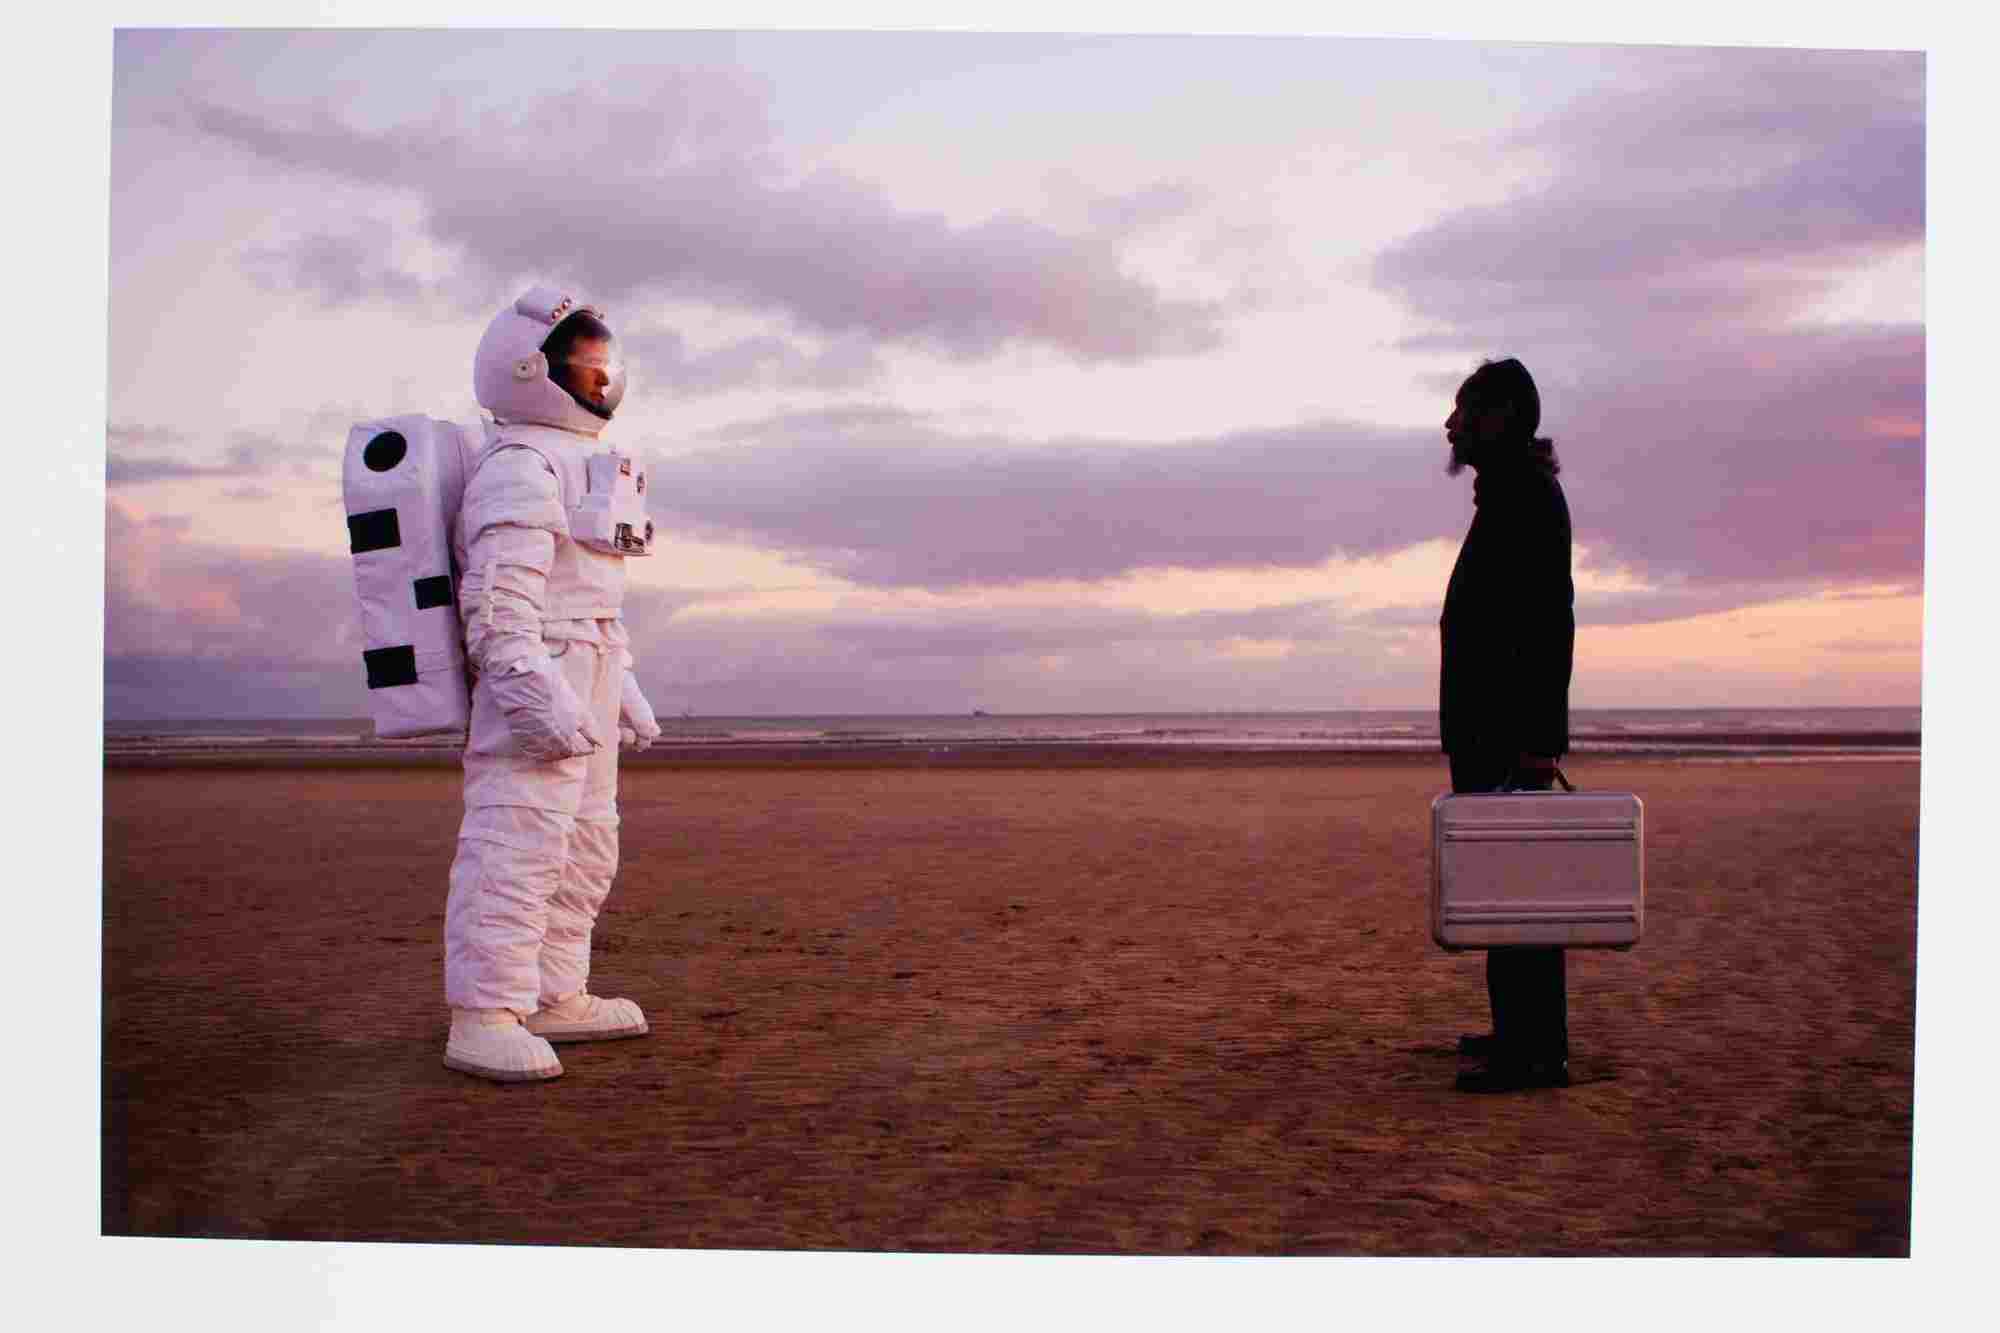 Apollo Spaceman On-the-Beach. erproductionsltd, Photographicworkshopslondon.com, GettyIMages, Darkroom and film photography courses London